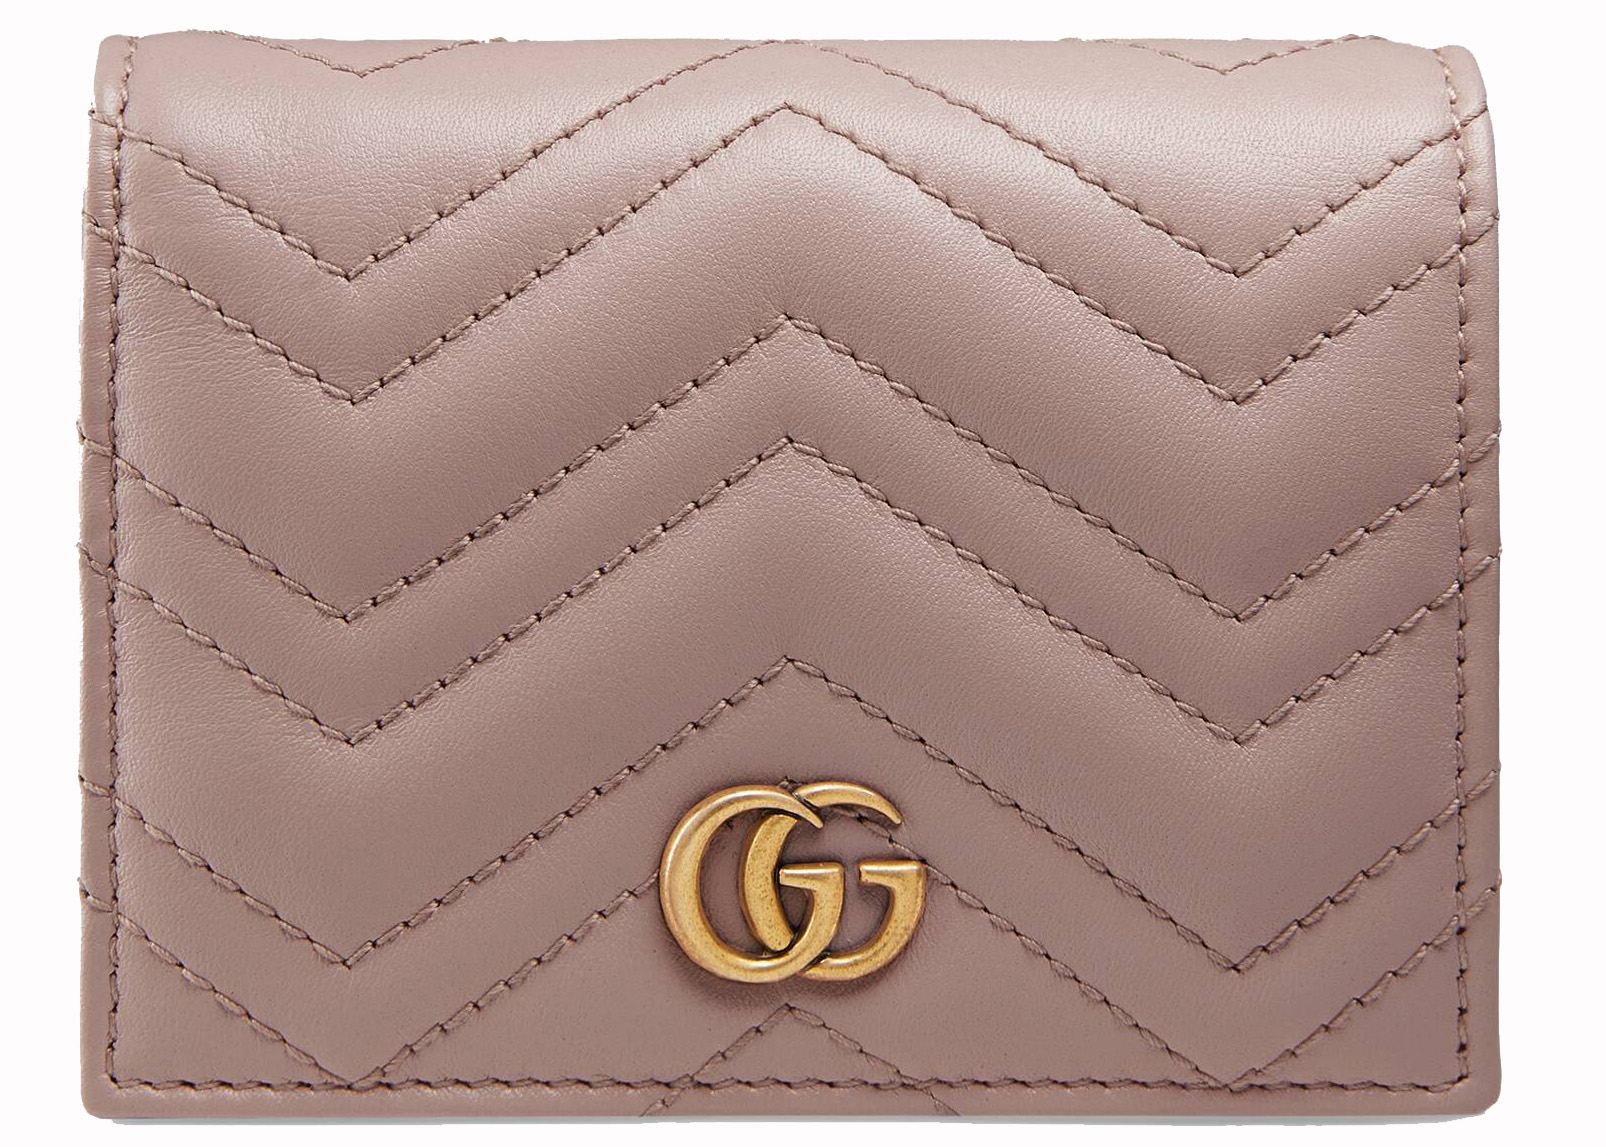 gg marmont card case